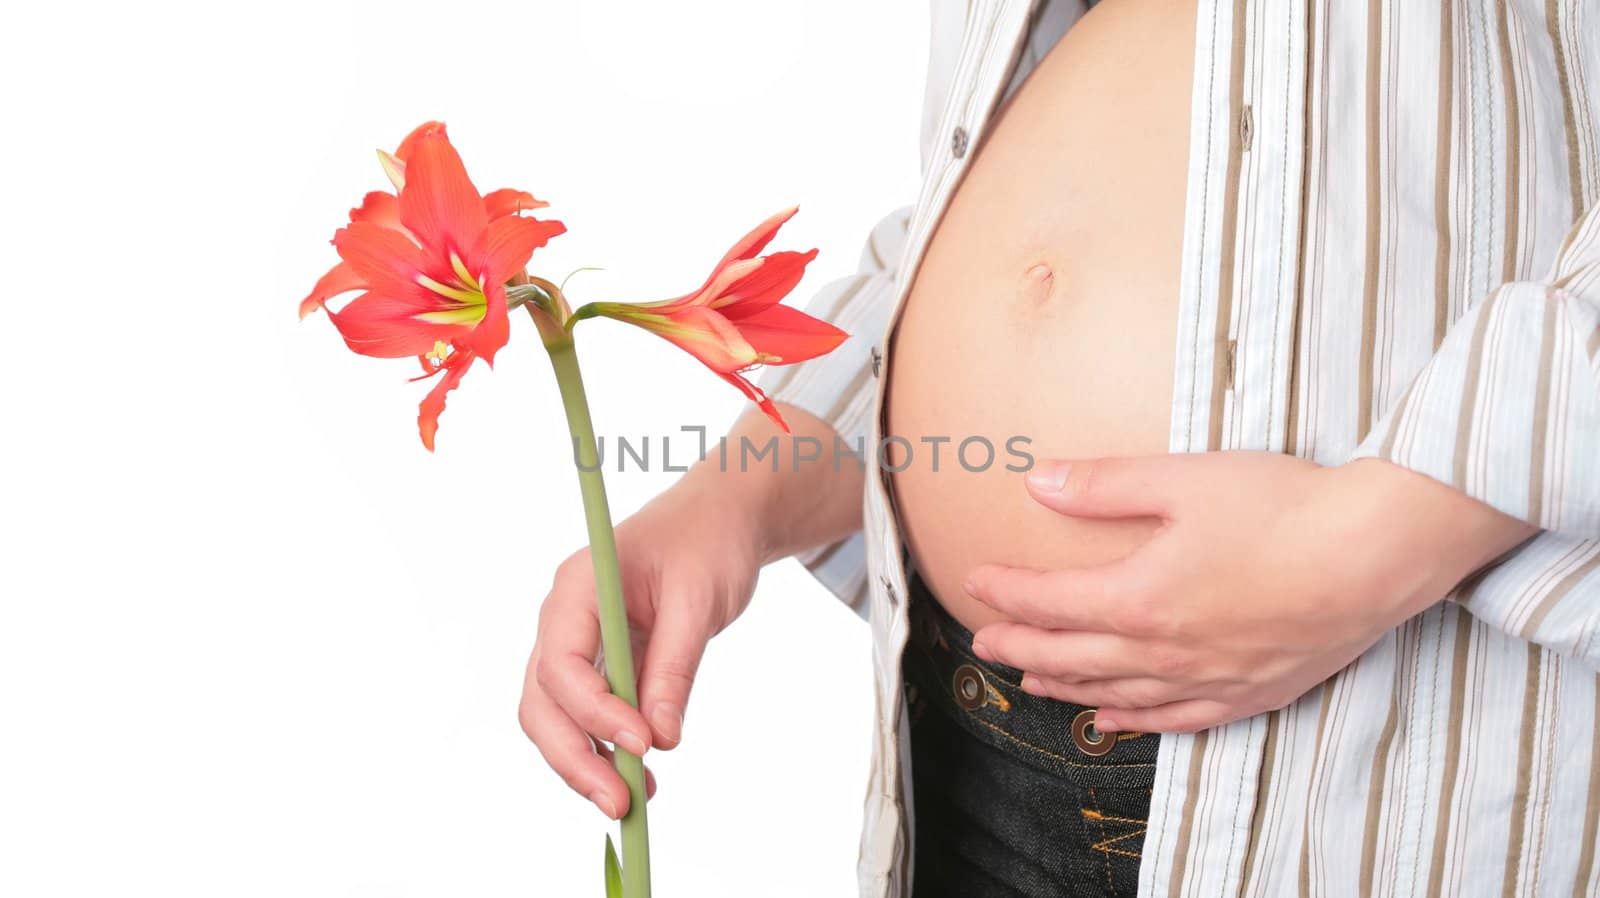 expectant mother in striped shirt with flower of the red lily on white background